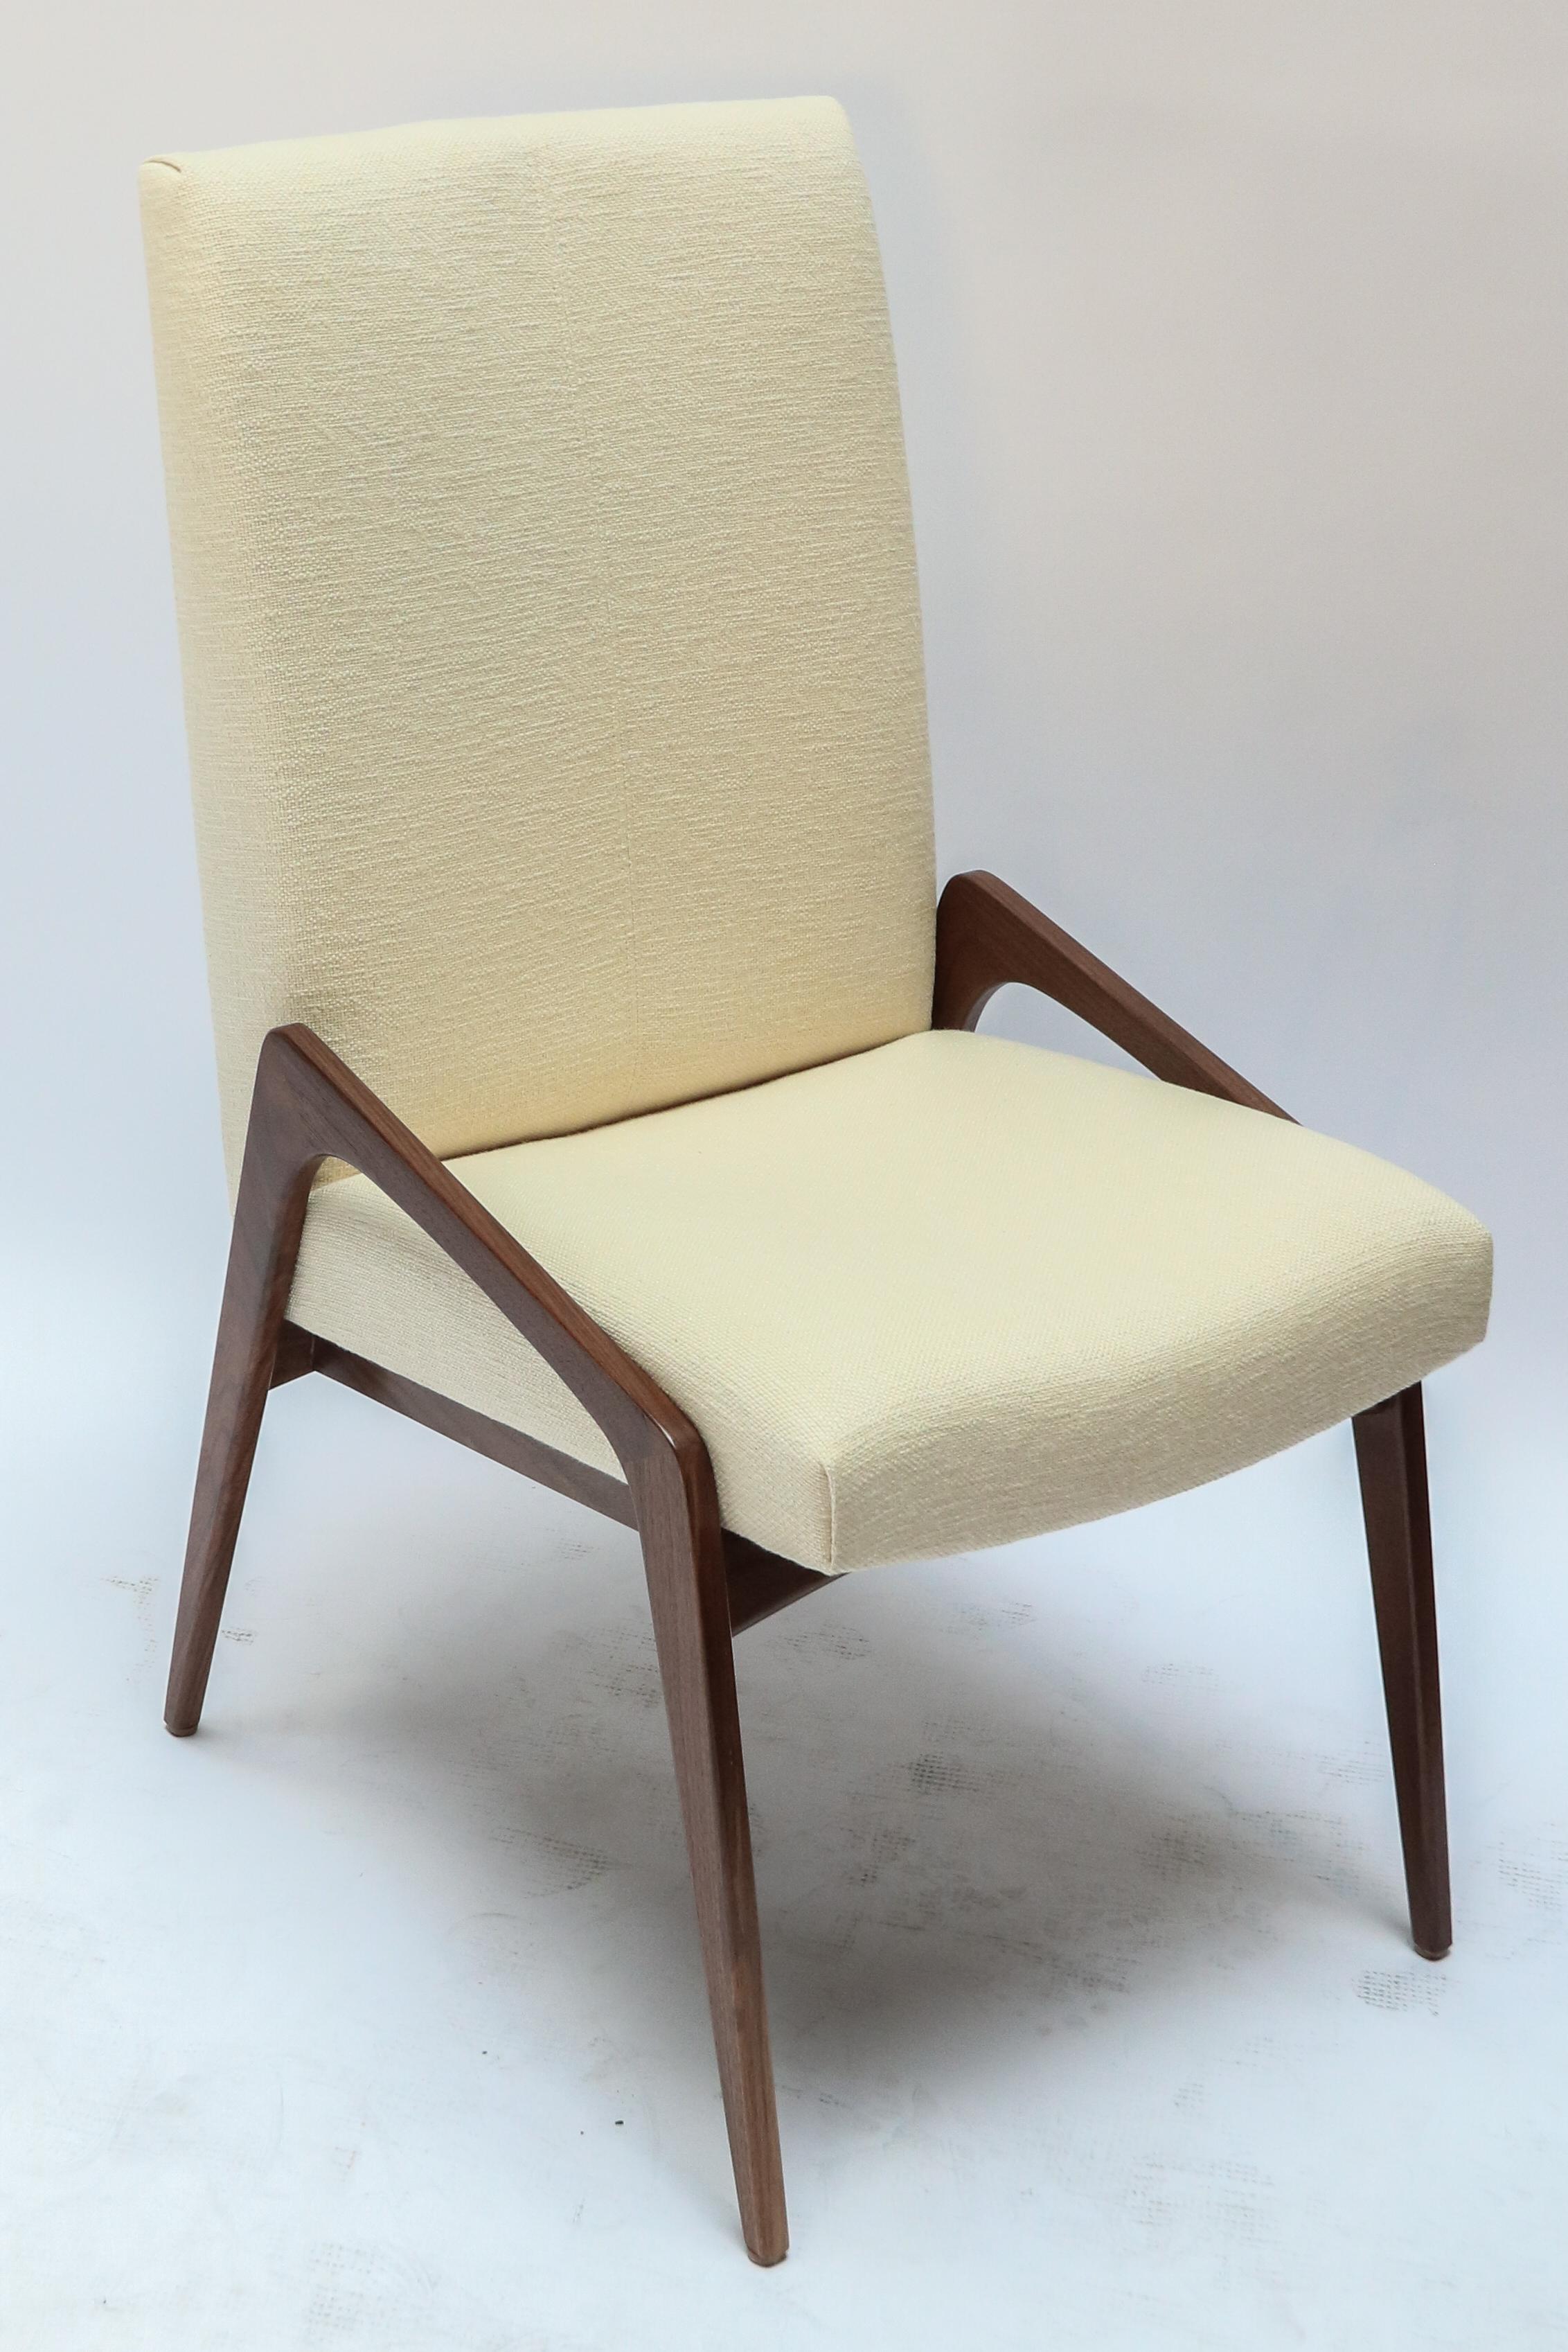 American Custom Midcentury Style Walnut Dining Chairs in Ivory Linen by Adesso Imports For Sale